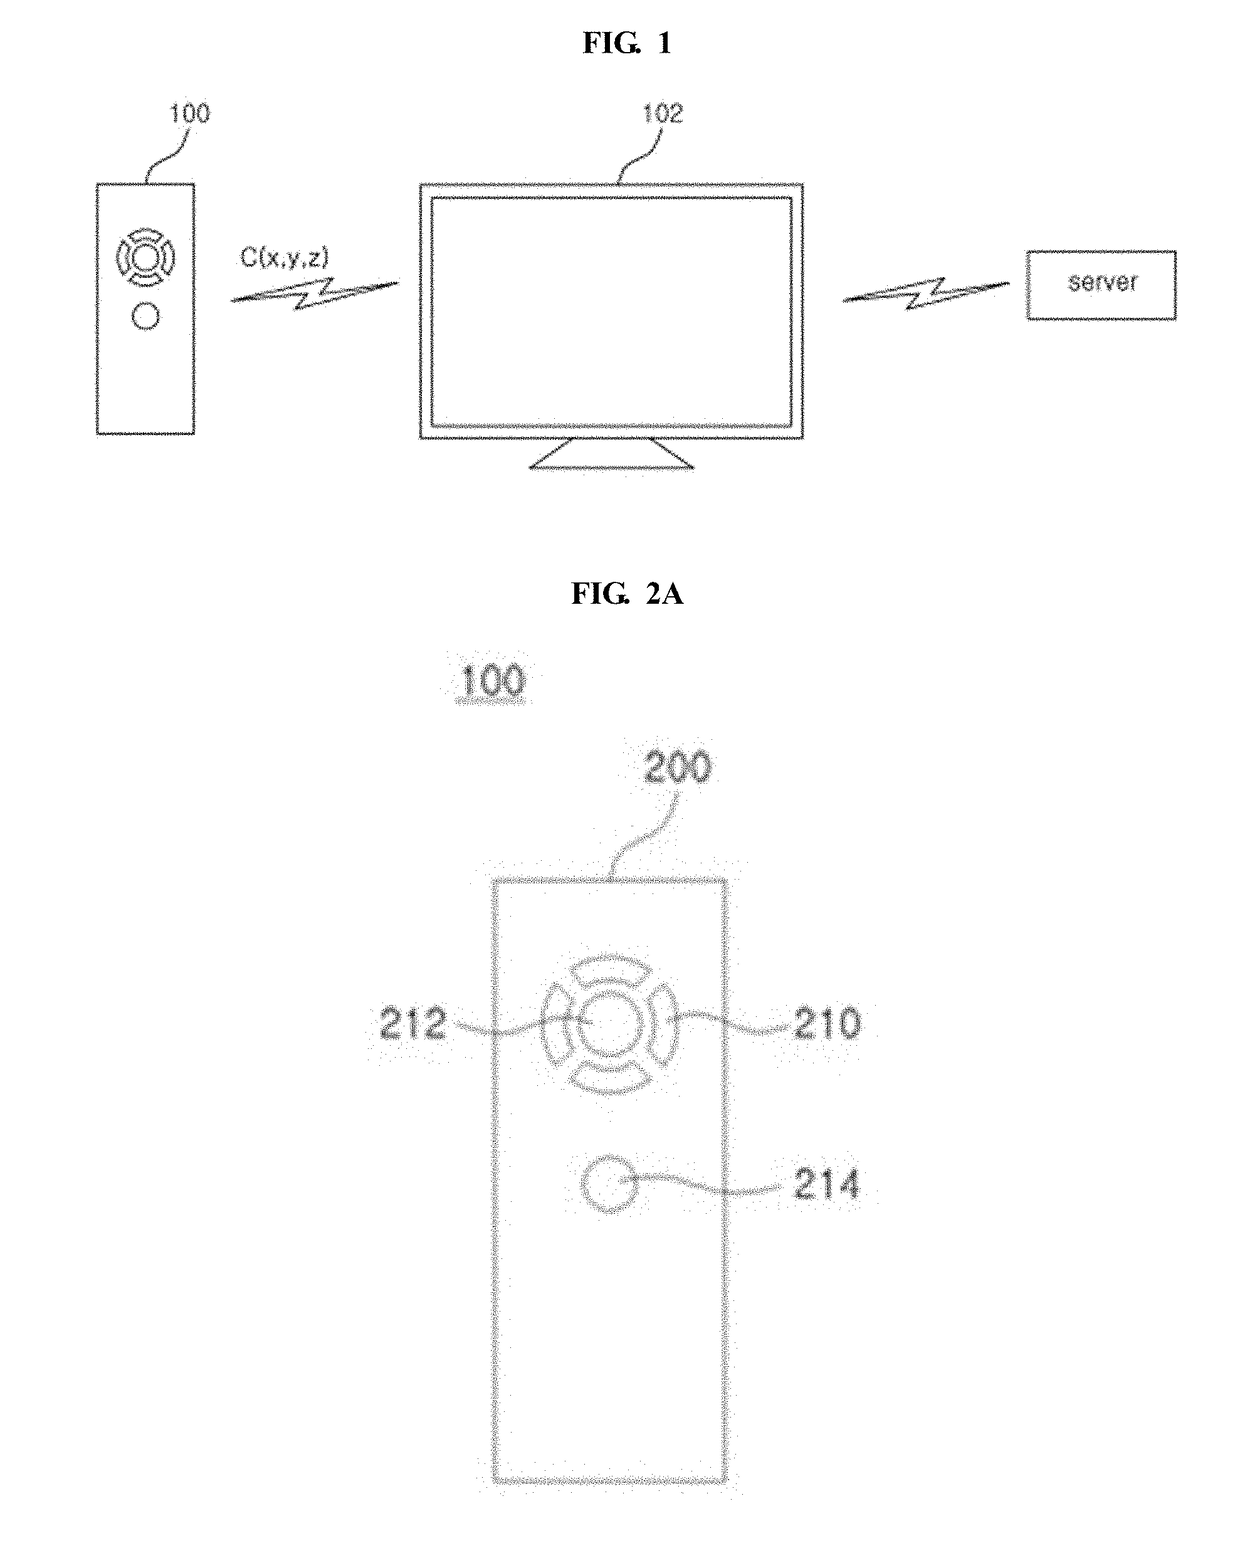 Computer processing device and method for providing coordinate compensation for a remote control key and detecting errors by using user profile information based on force inputs